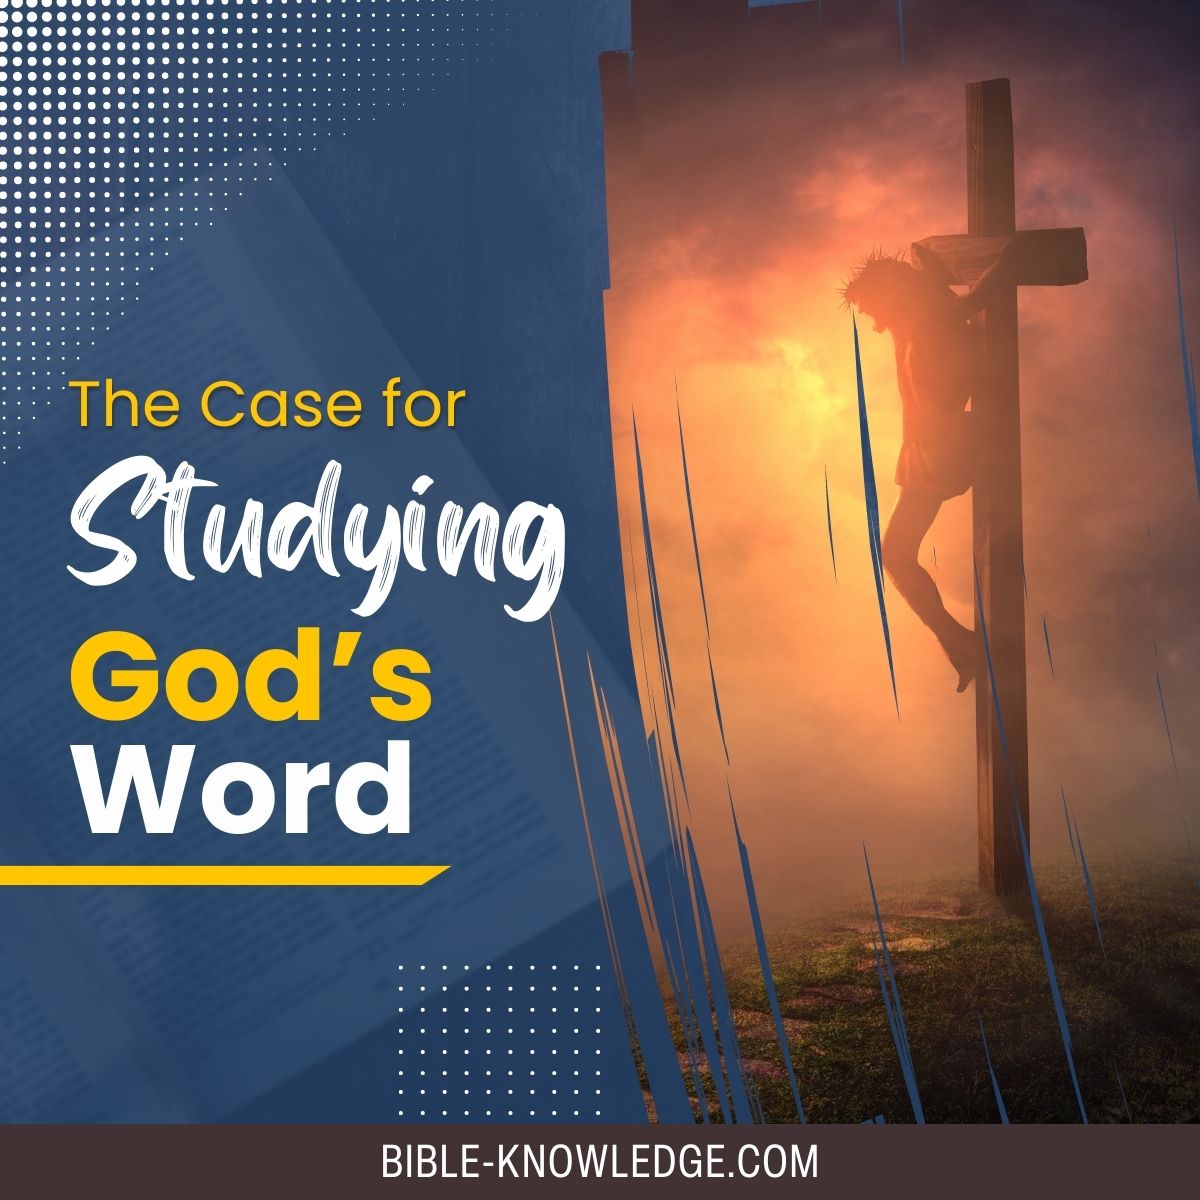 The Case for Studying God's Word